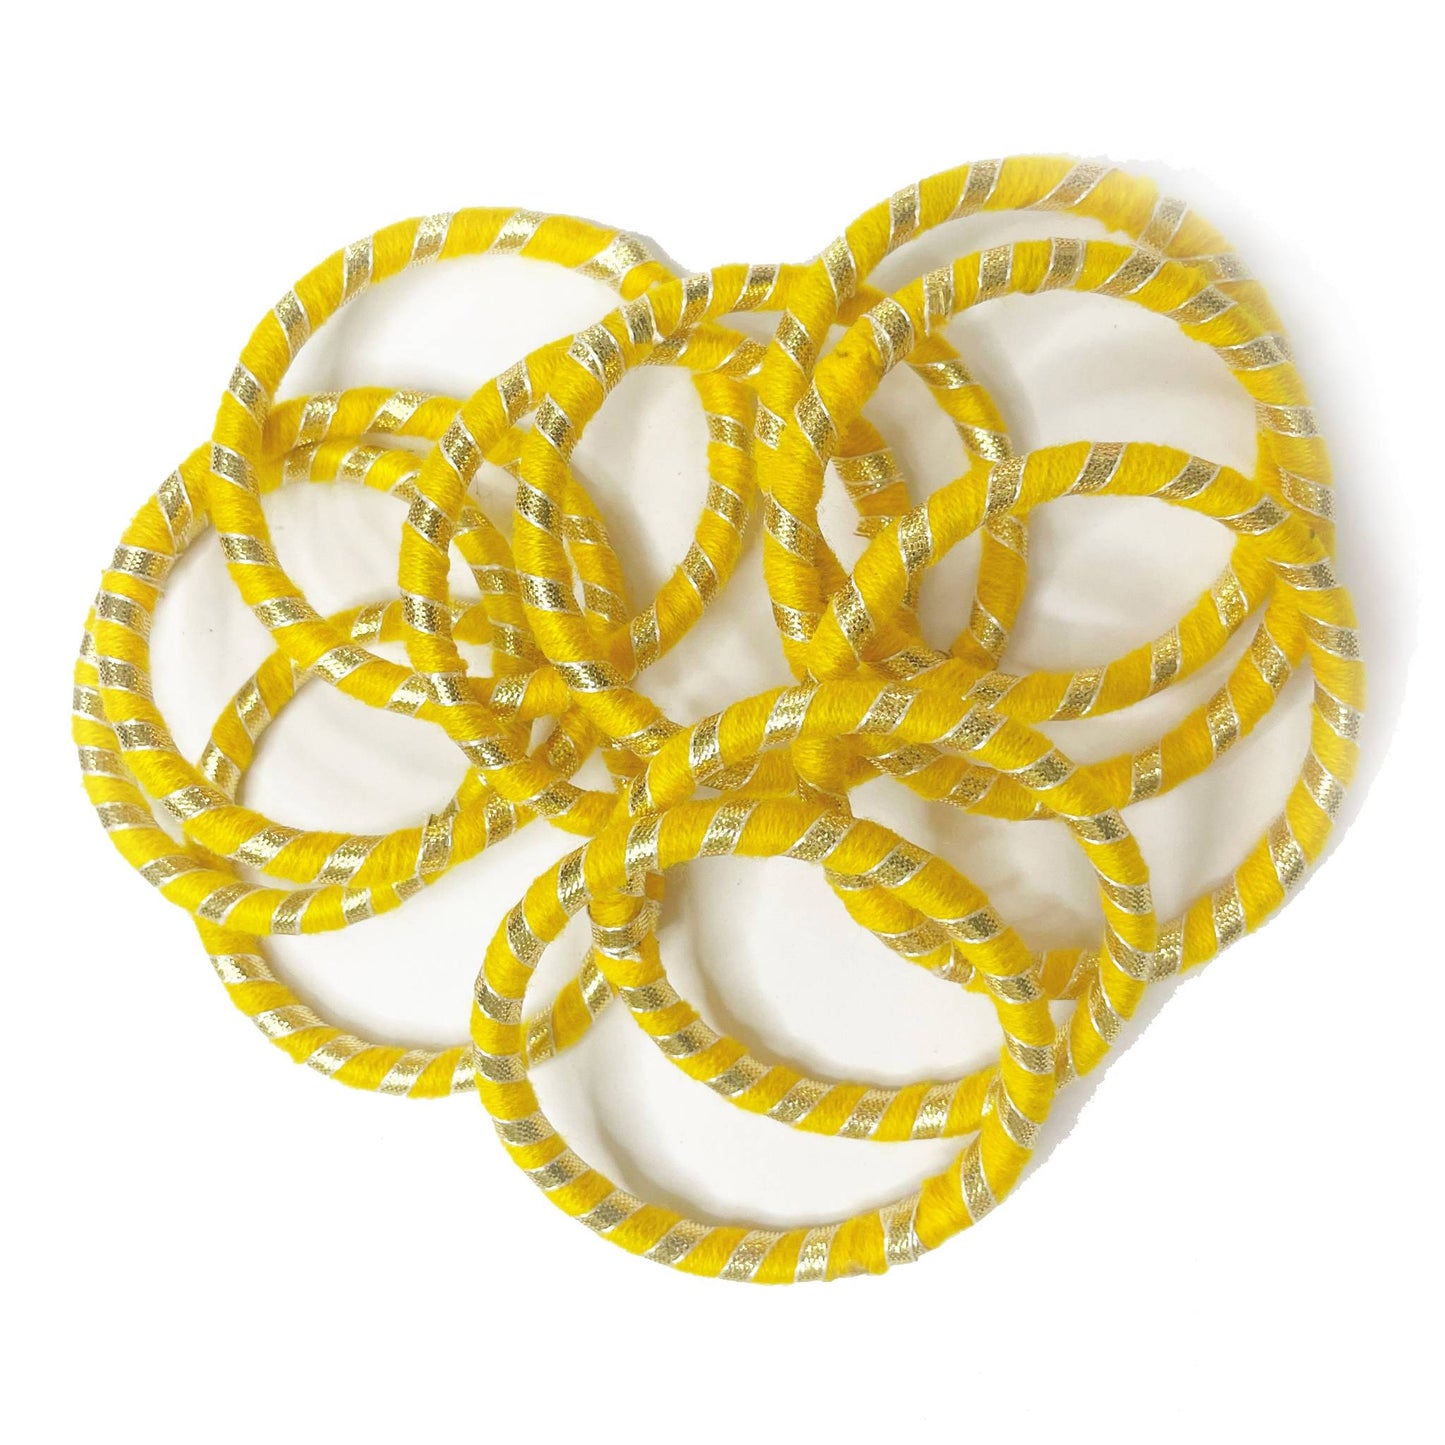 Indian Petals Threaded Big Round Bangle with Gota for Craft Packing Rakhi or Decoration - 11552, Yellow